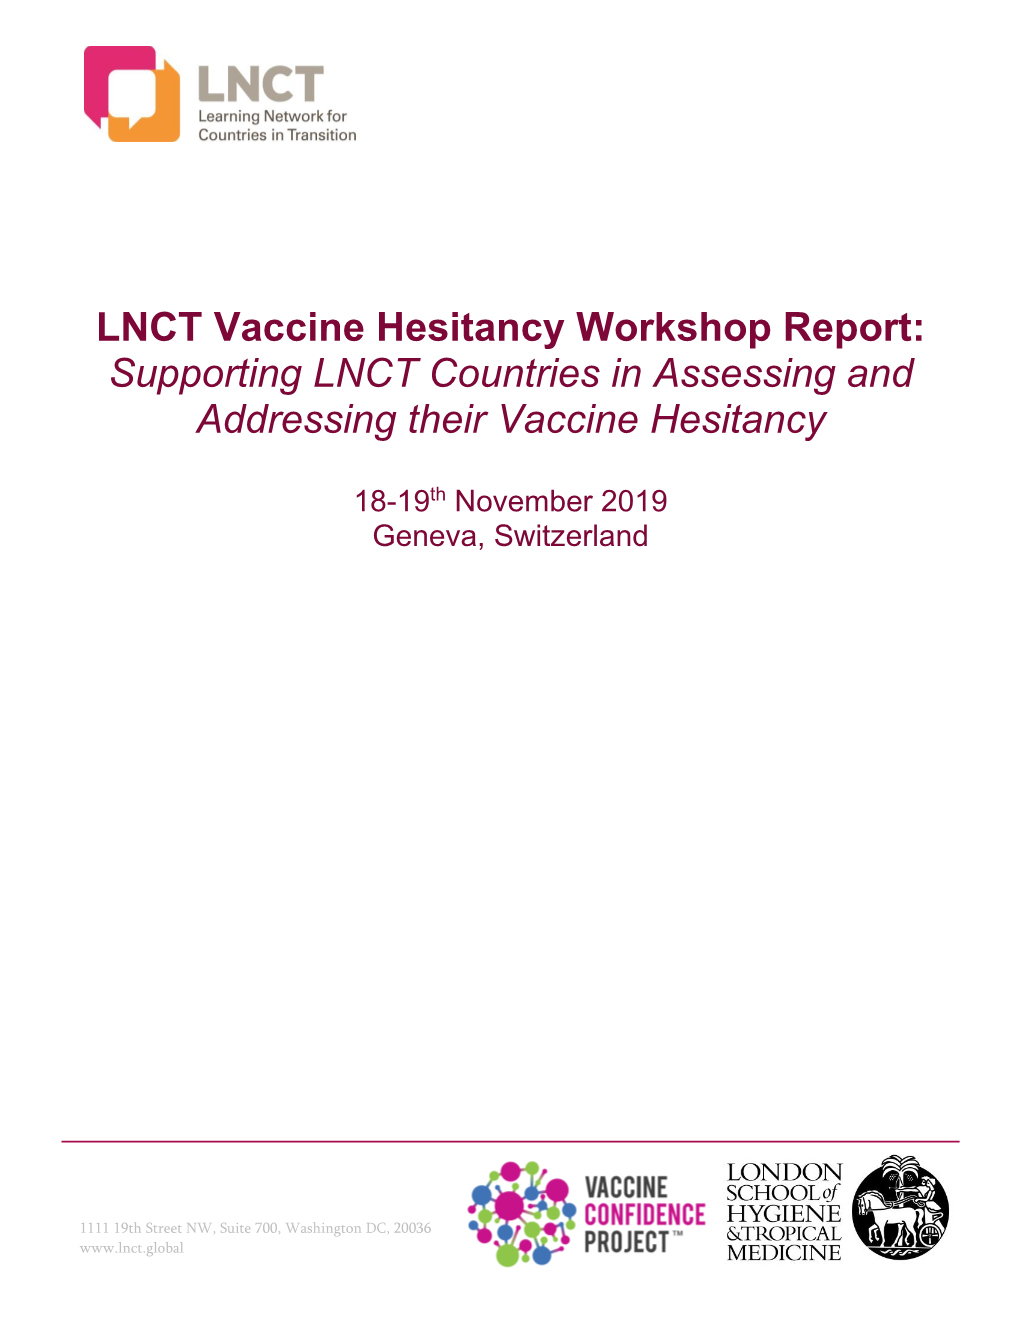 LNCT Vaccine Hesitancy Workshop Report: Supporting LNCT Countries in Assessing and Addressing Their Vaccine Hesitancy